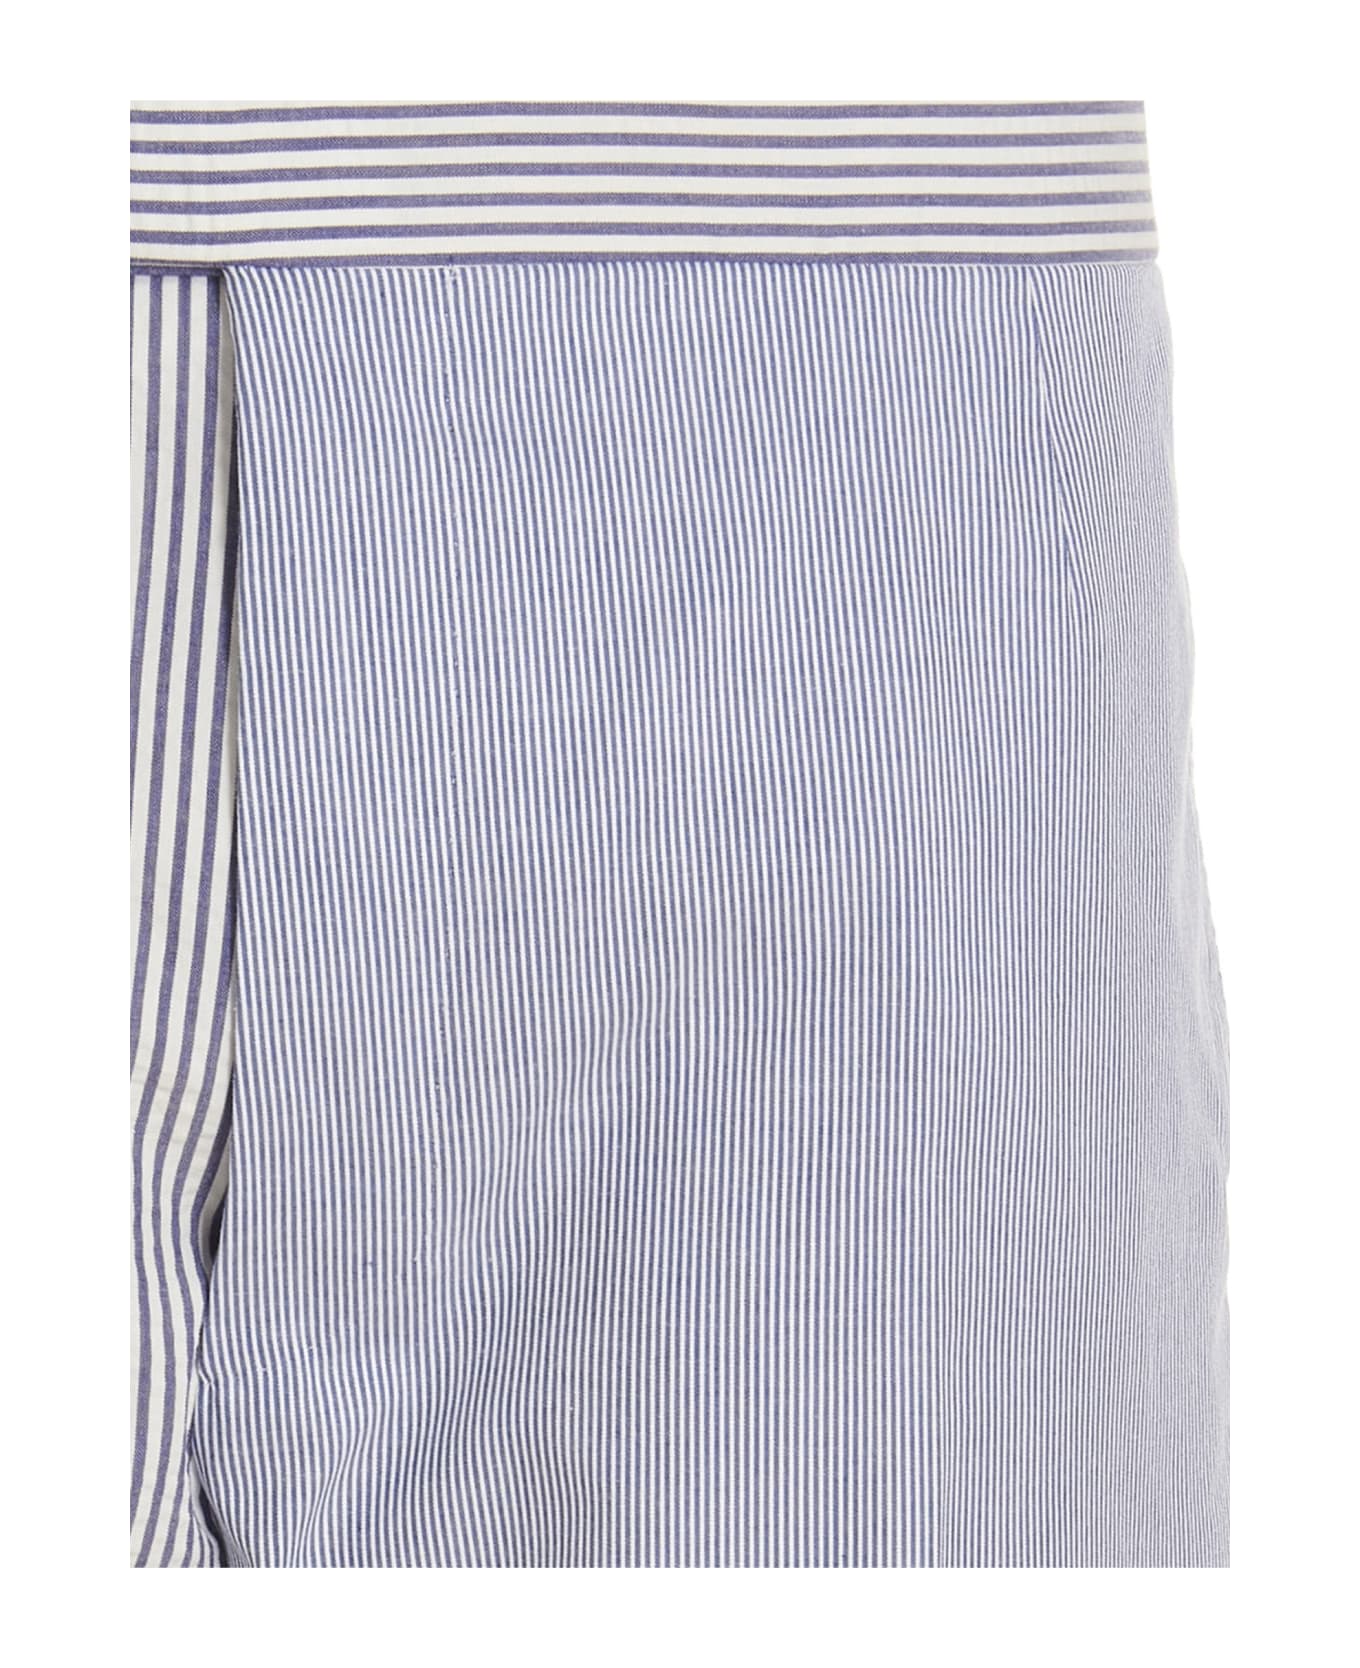 Thom Browne Striped Trousers - Light Blue ボトムス